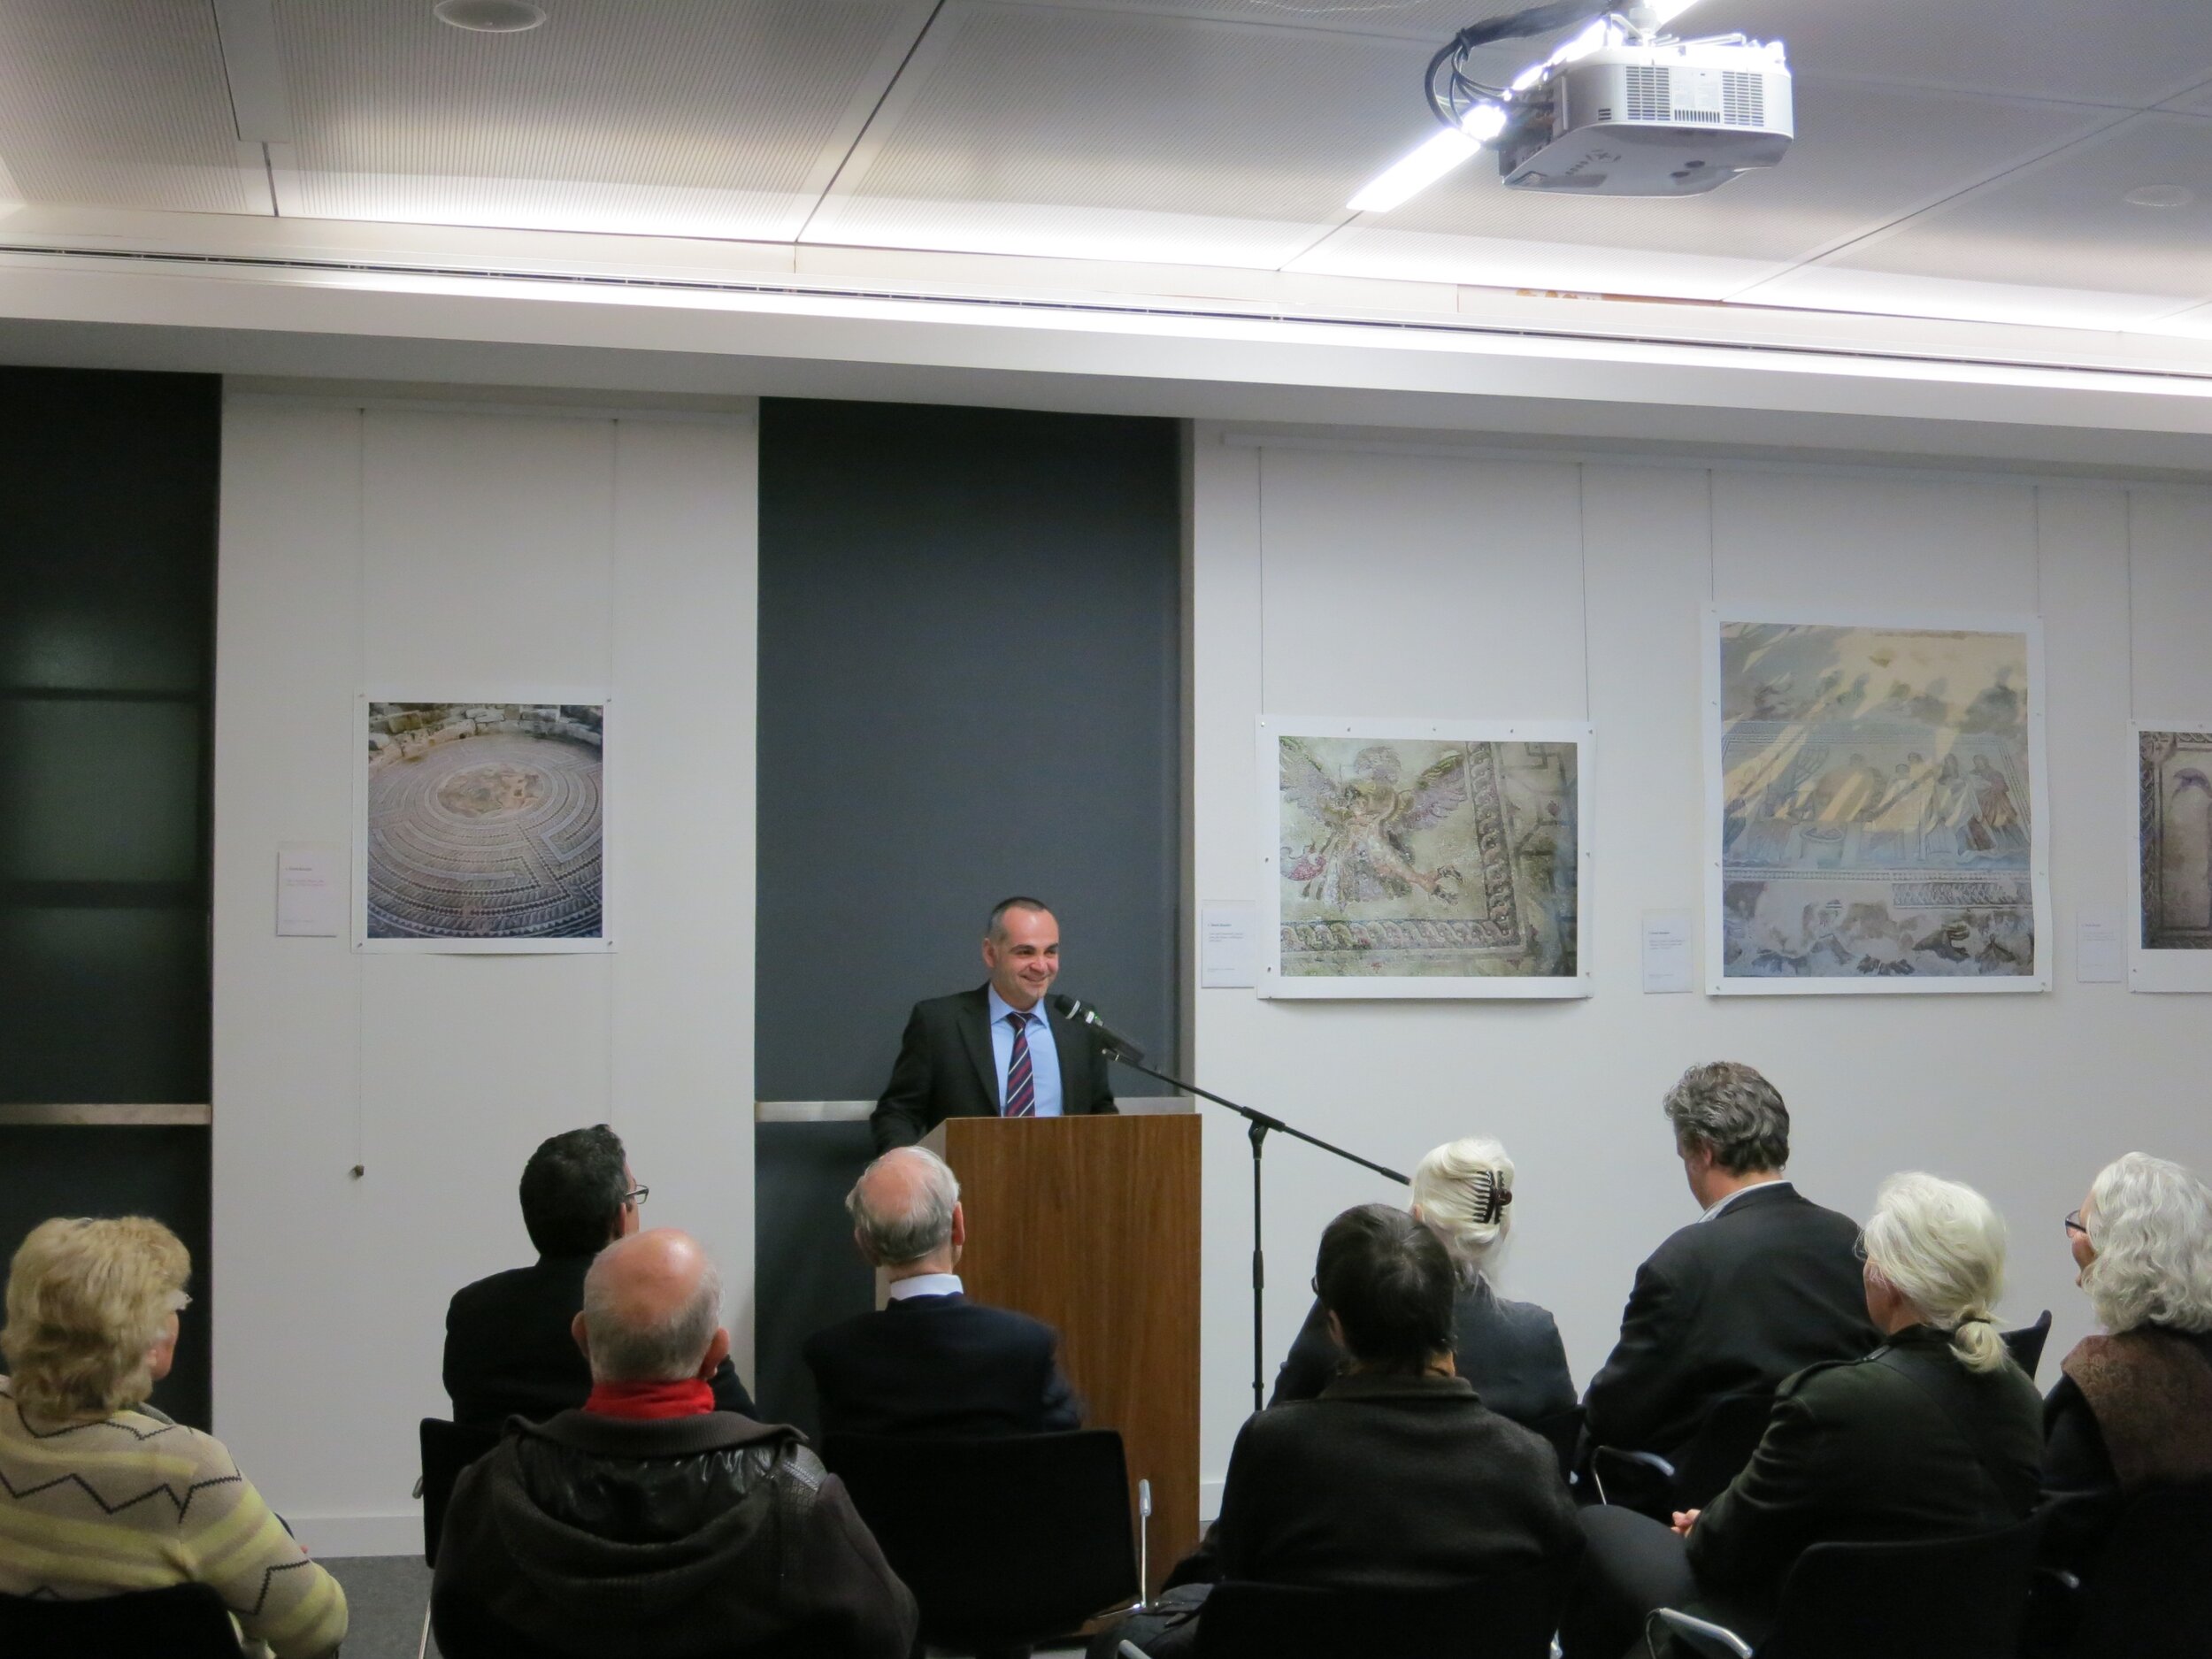  Andreas Hadjithemistos, Consul of the High Commission of Cyprus in Canberra, speaking at the opening of  Response to Cyprus,  10 July 2013. The event was hosted by the Australian Archaeological Institute at Athens (AAIA) at the Centre of Classical a